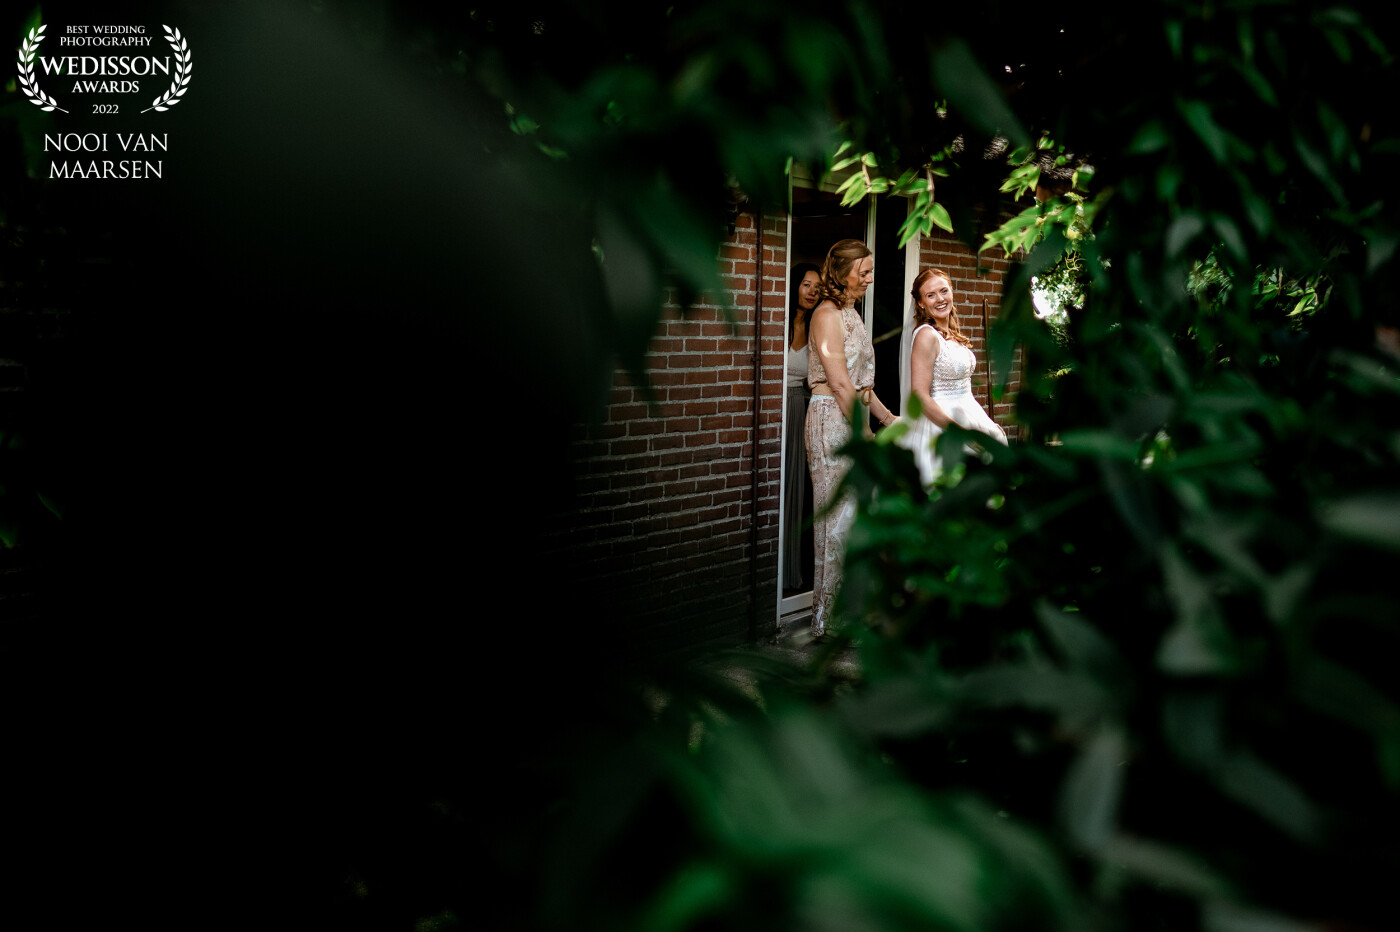 This moment was captured right before the first look at the Bed and Breakfast Mon Chouette in Leusden, the Netherlands. <br />
I positioned the groom at an open area and went to see where the bride was at. At that moment she walked outside the door and I called her name and caught her attention.